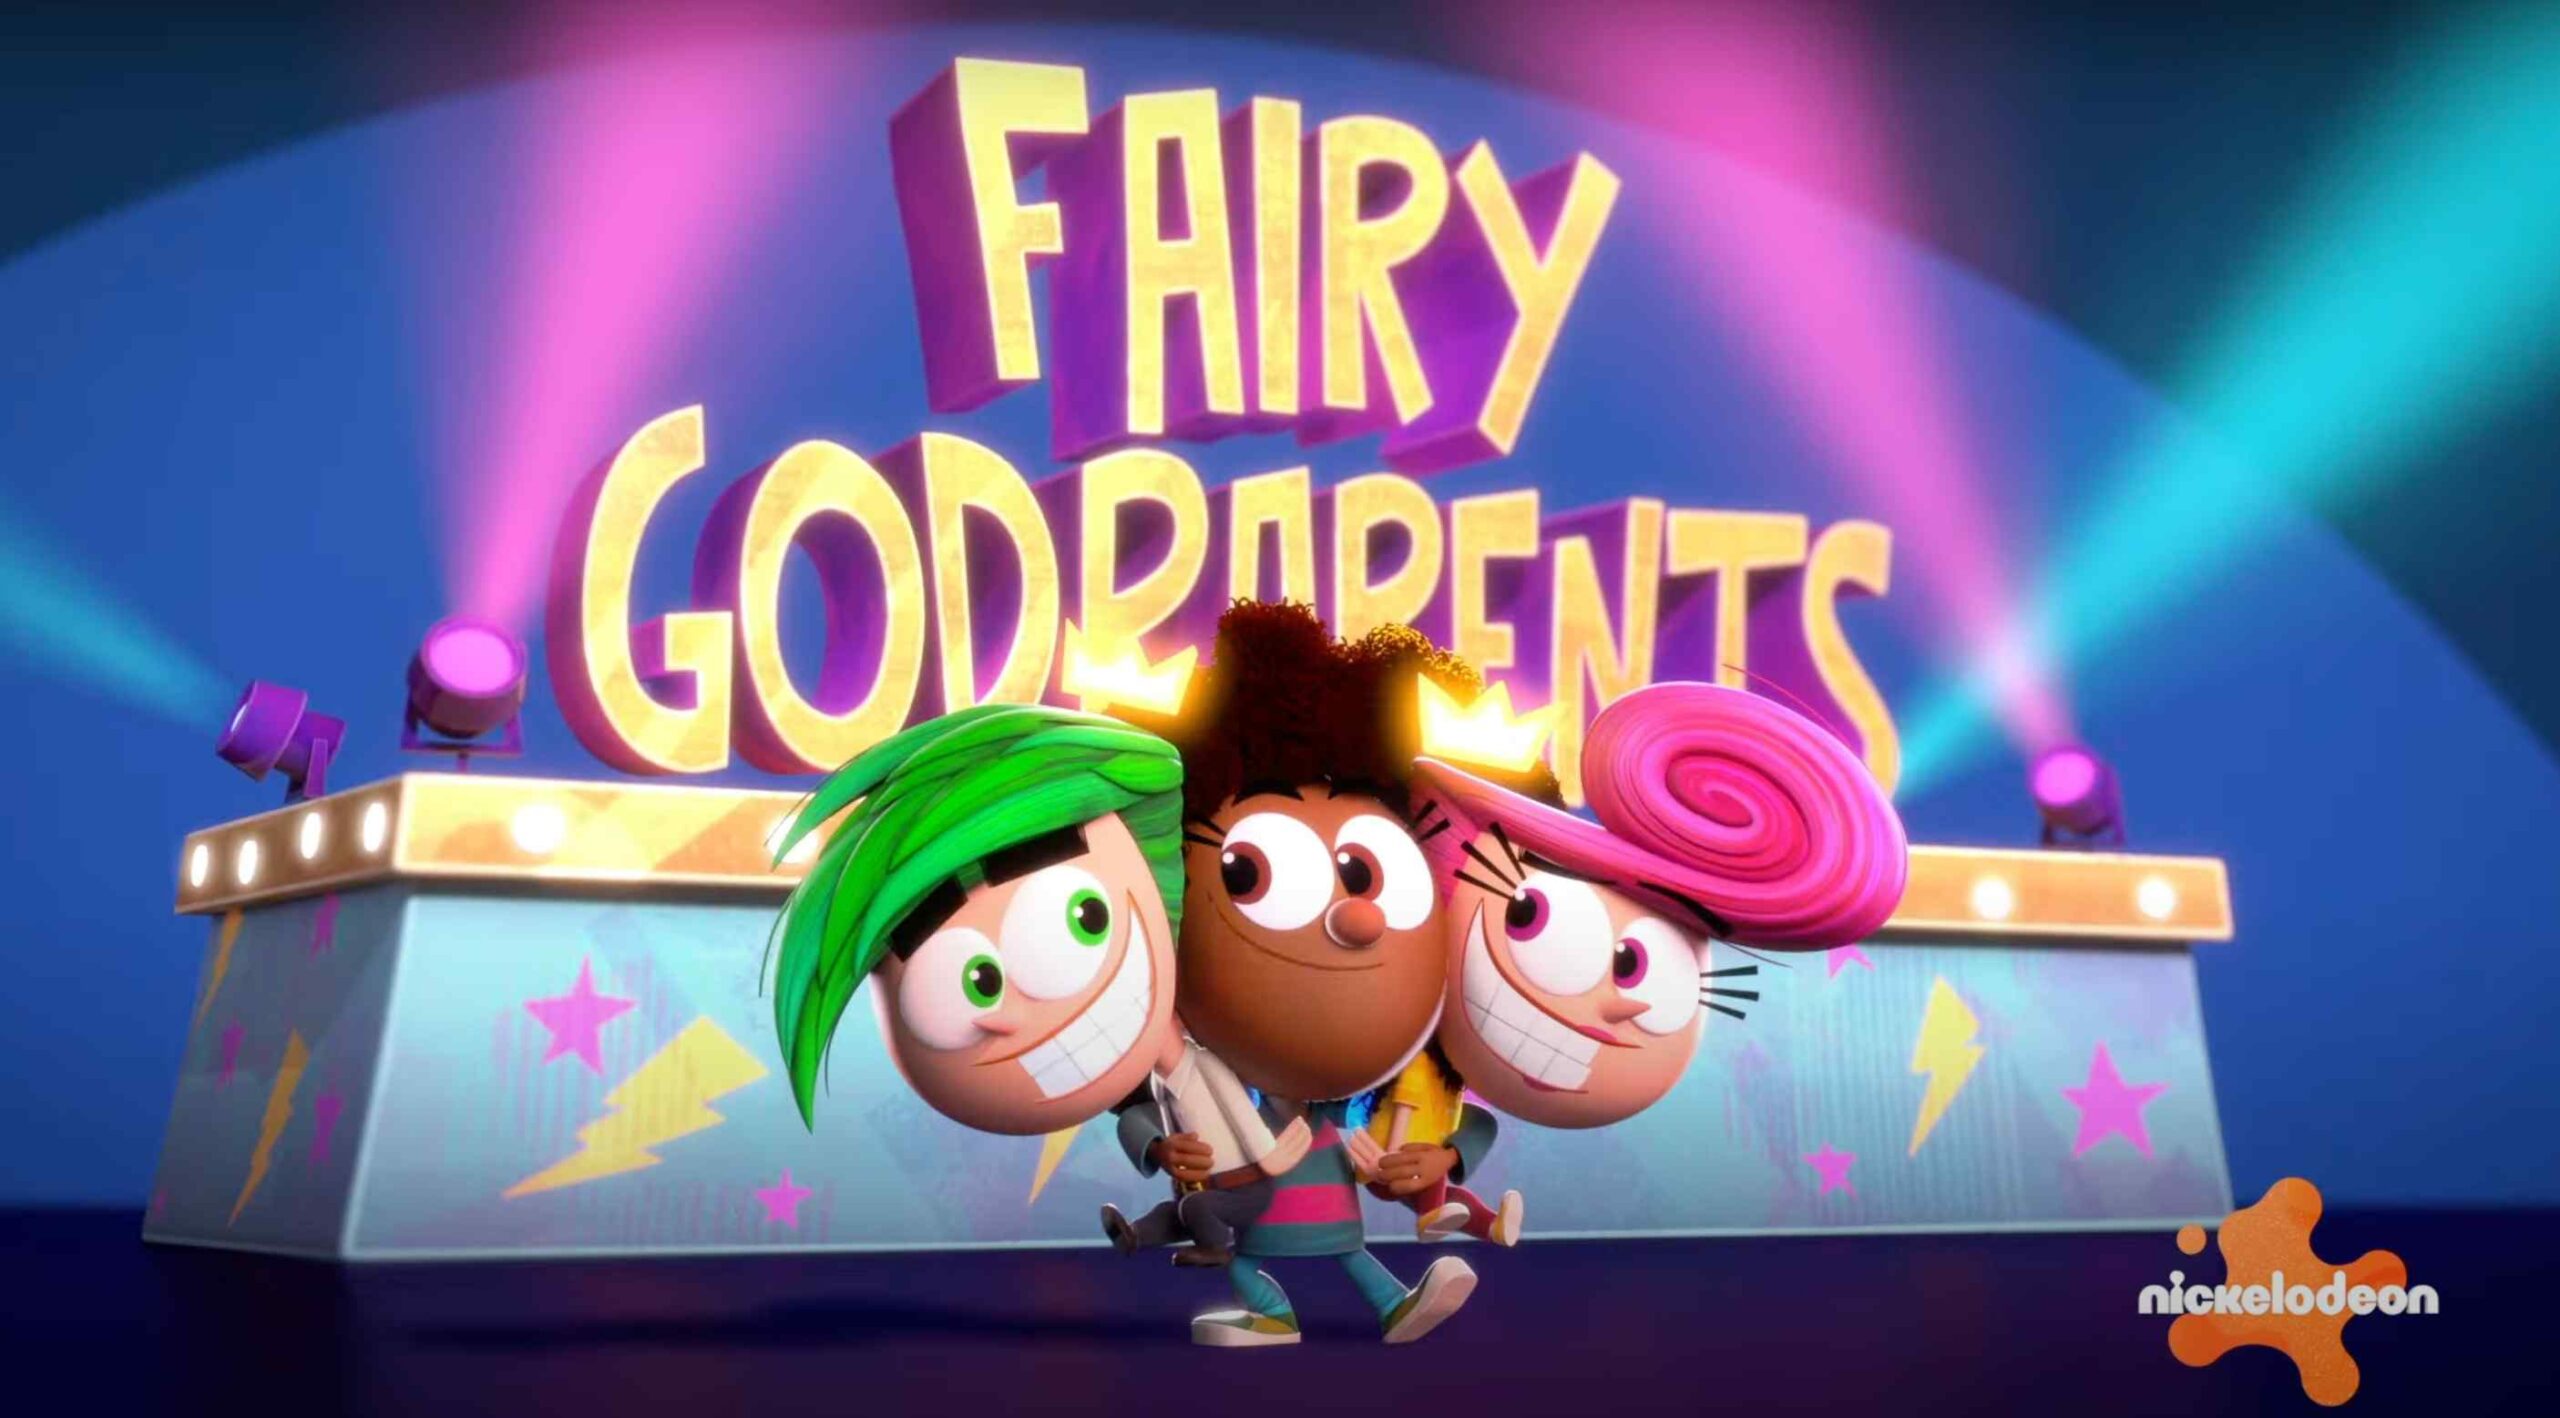 'The Fairly OddParents: A New Wish' Trailer: Cosmo And Wanda Have A Young Black Girl As Their New Godchild